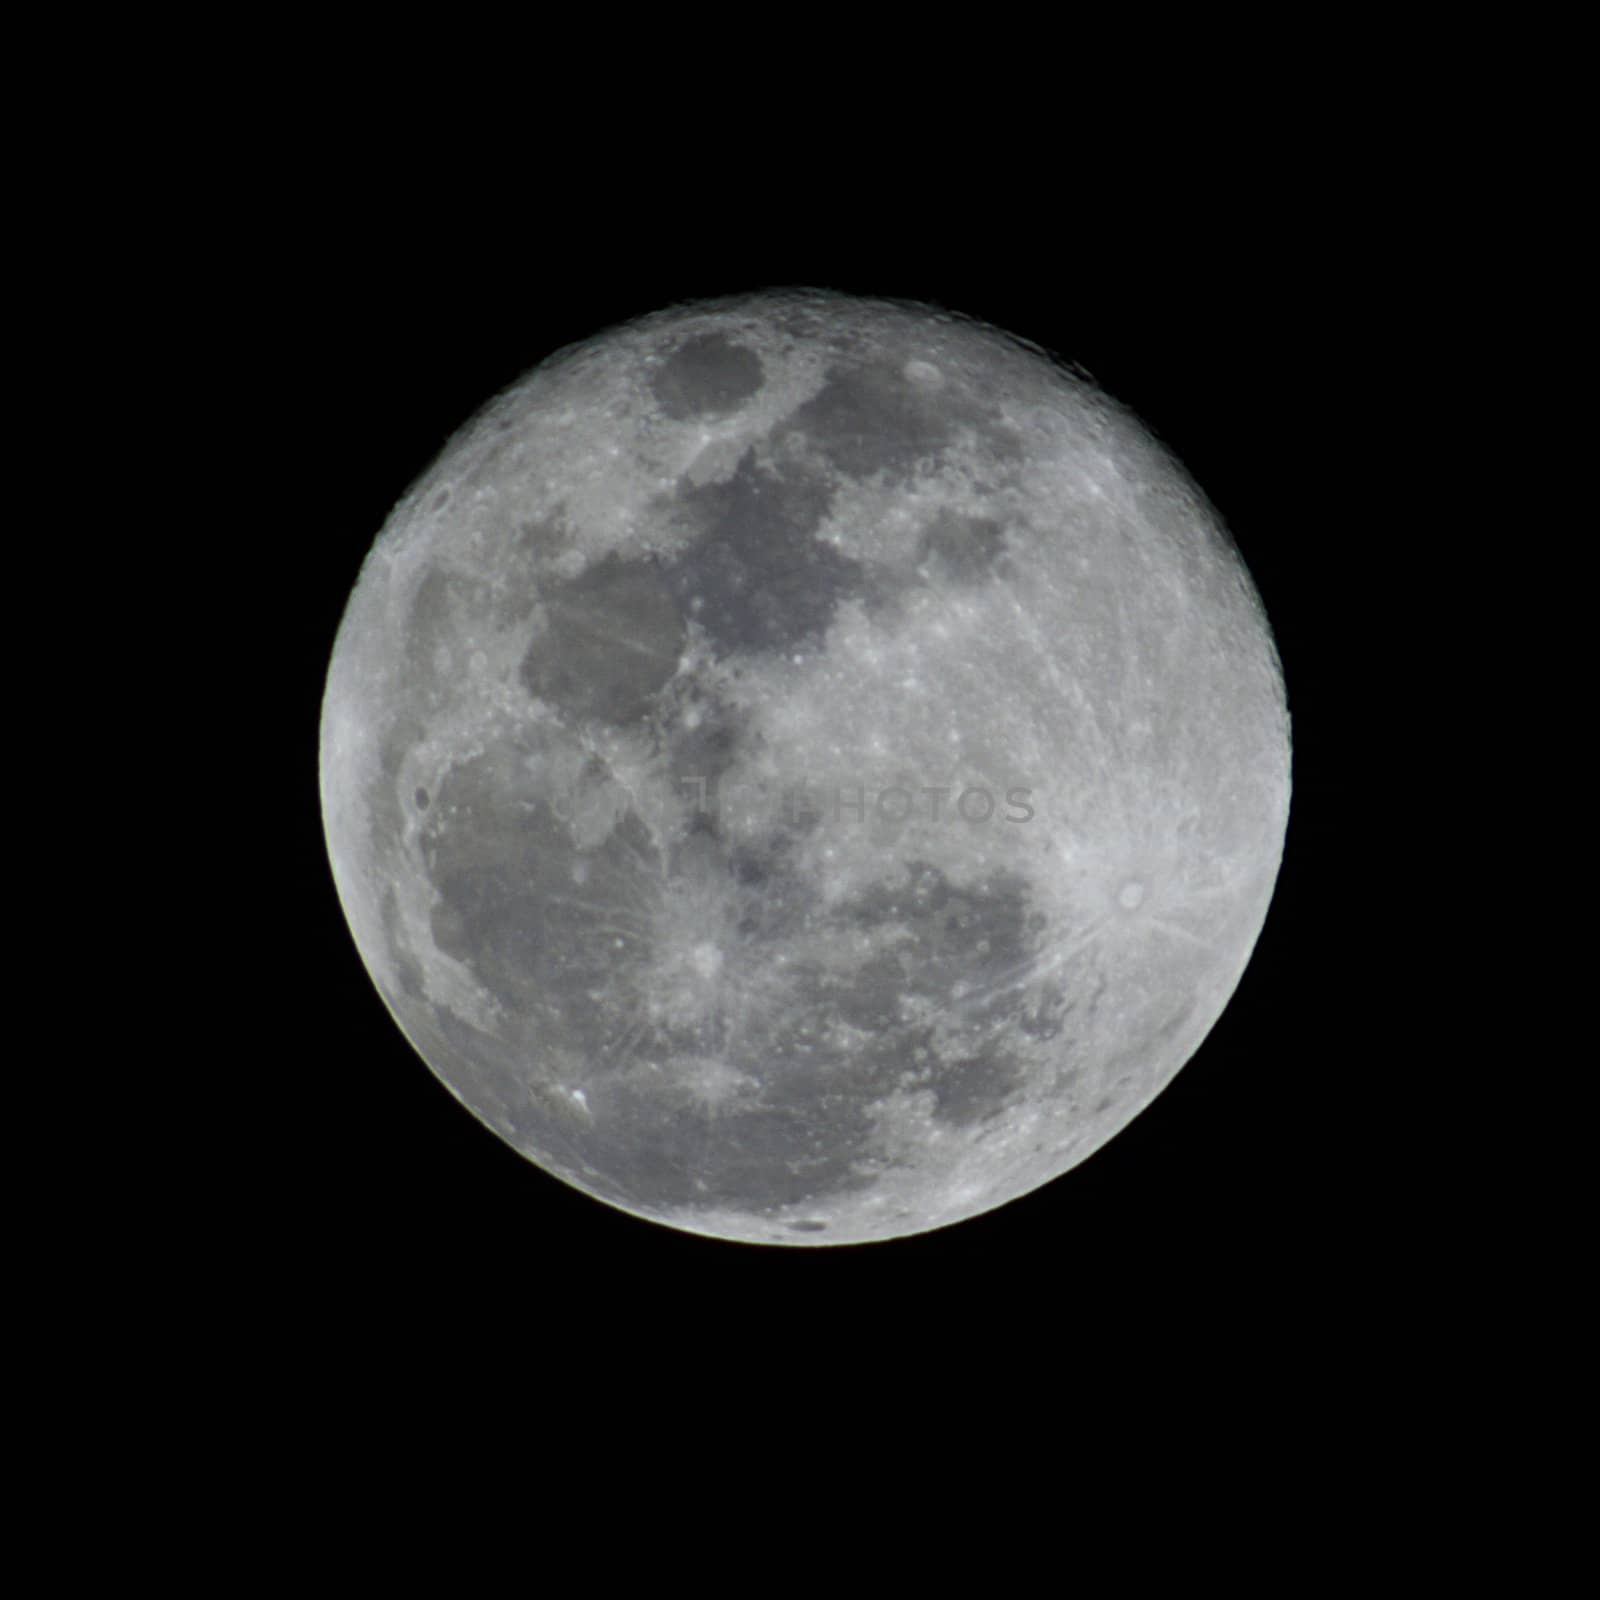 A detailed full moon. You can see all craters and details.